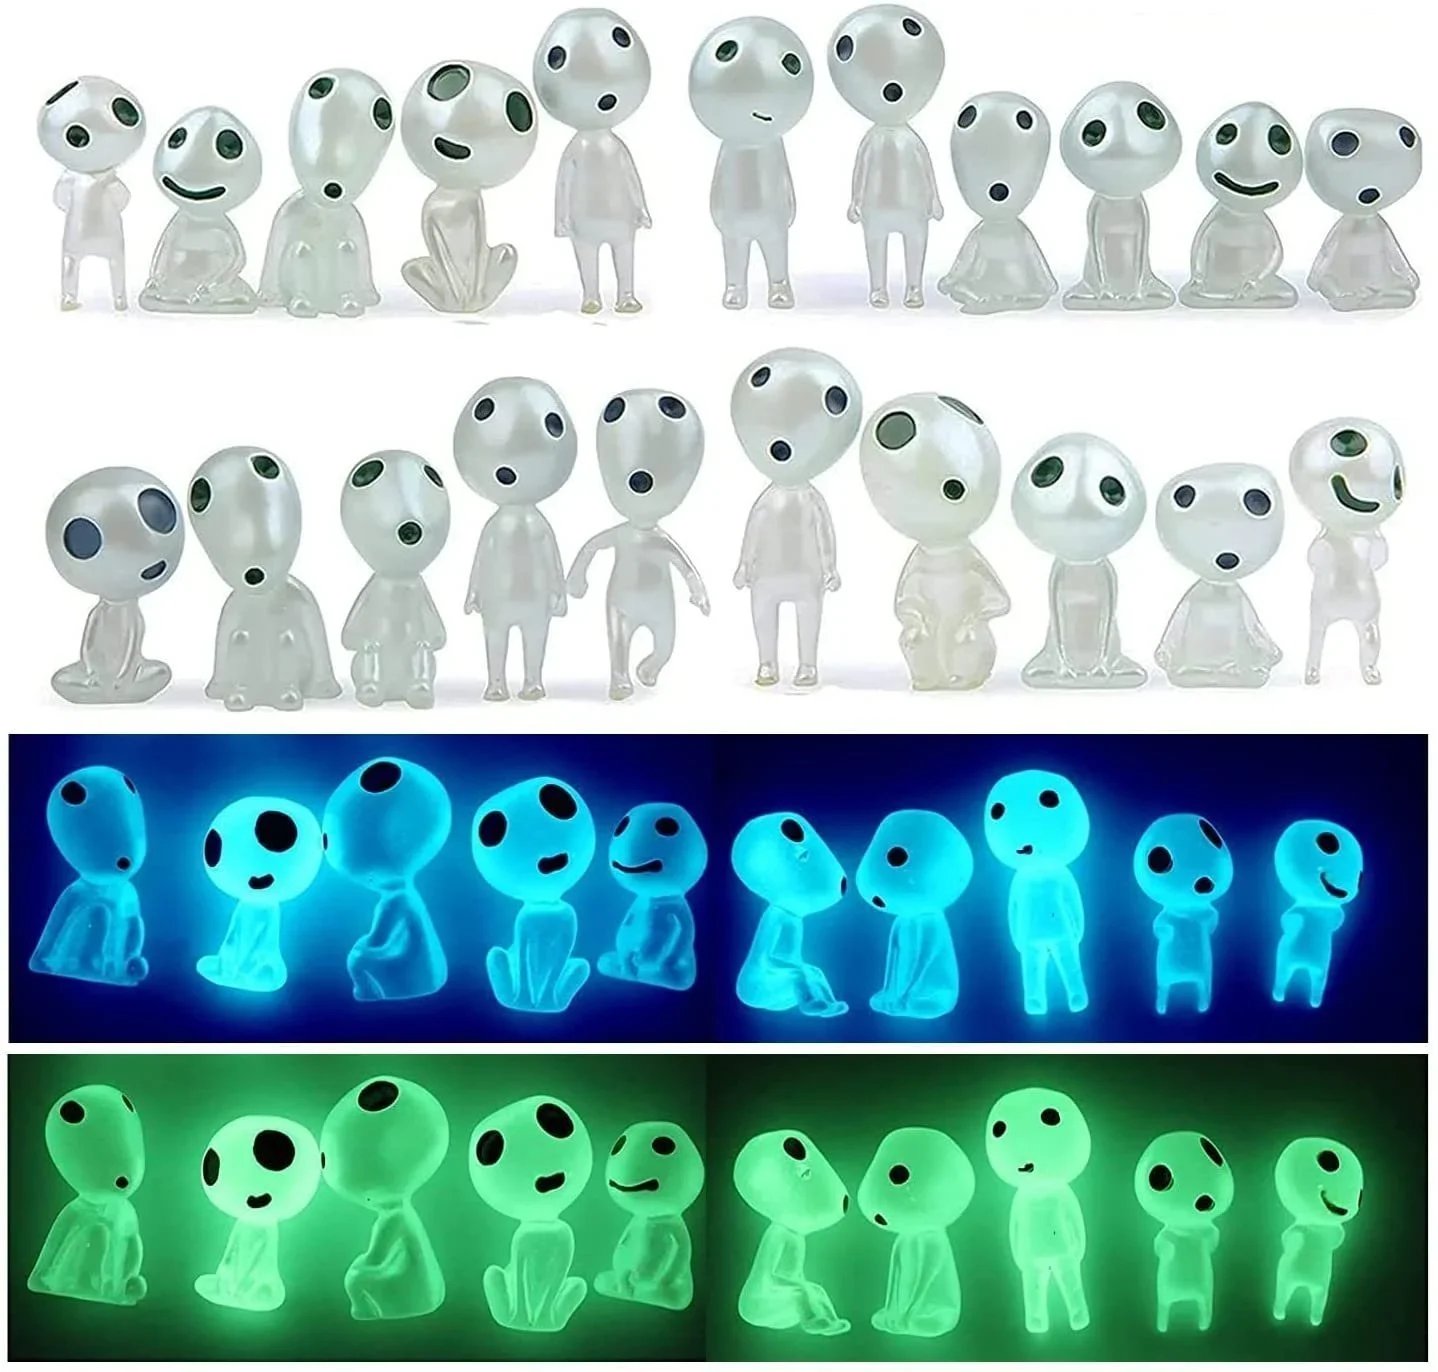 (Last Day Promotion - 48% OFF) Luminous Tree Spirits, Buy 4 Get Extra 20% OFF & Free Shipping ONLY TODAY🔥